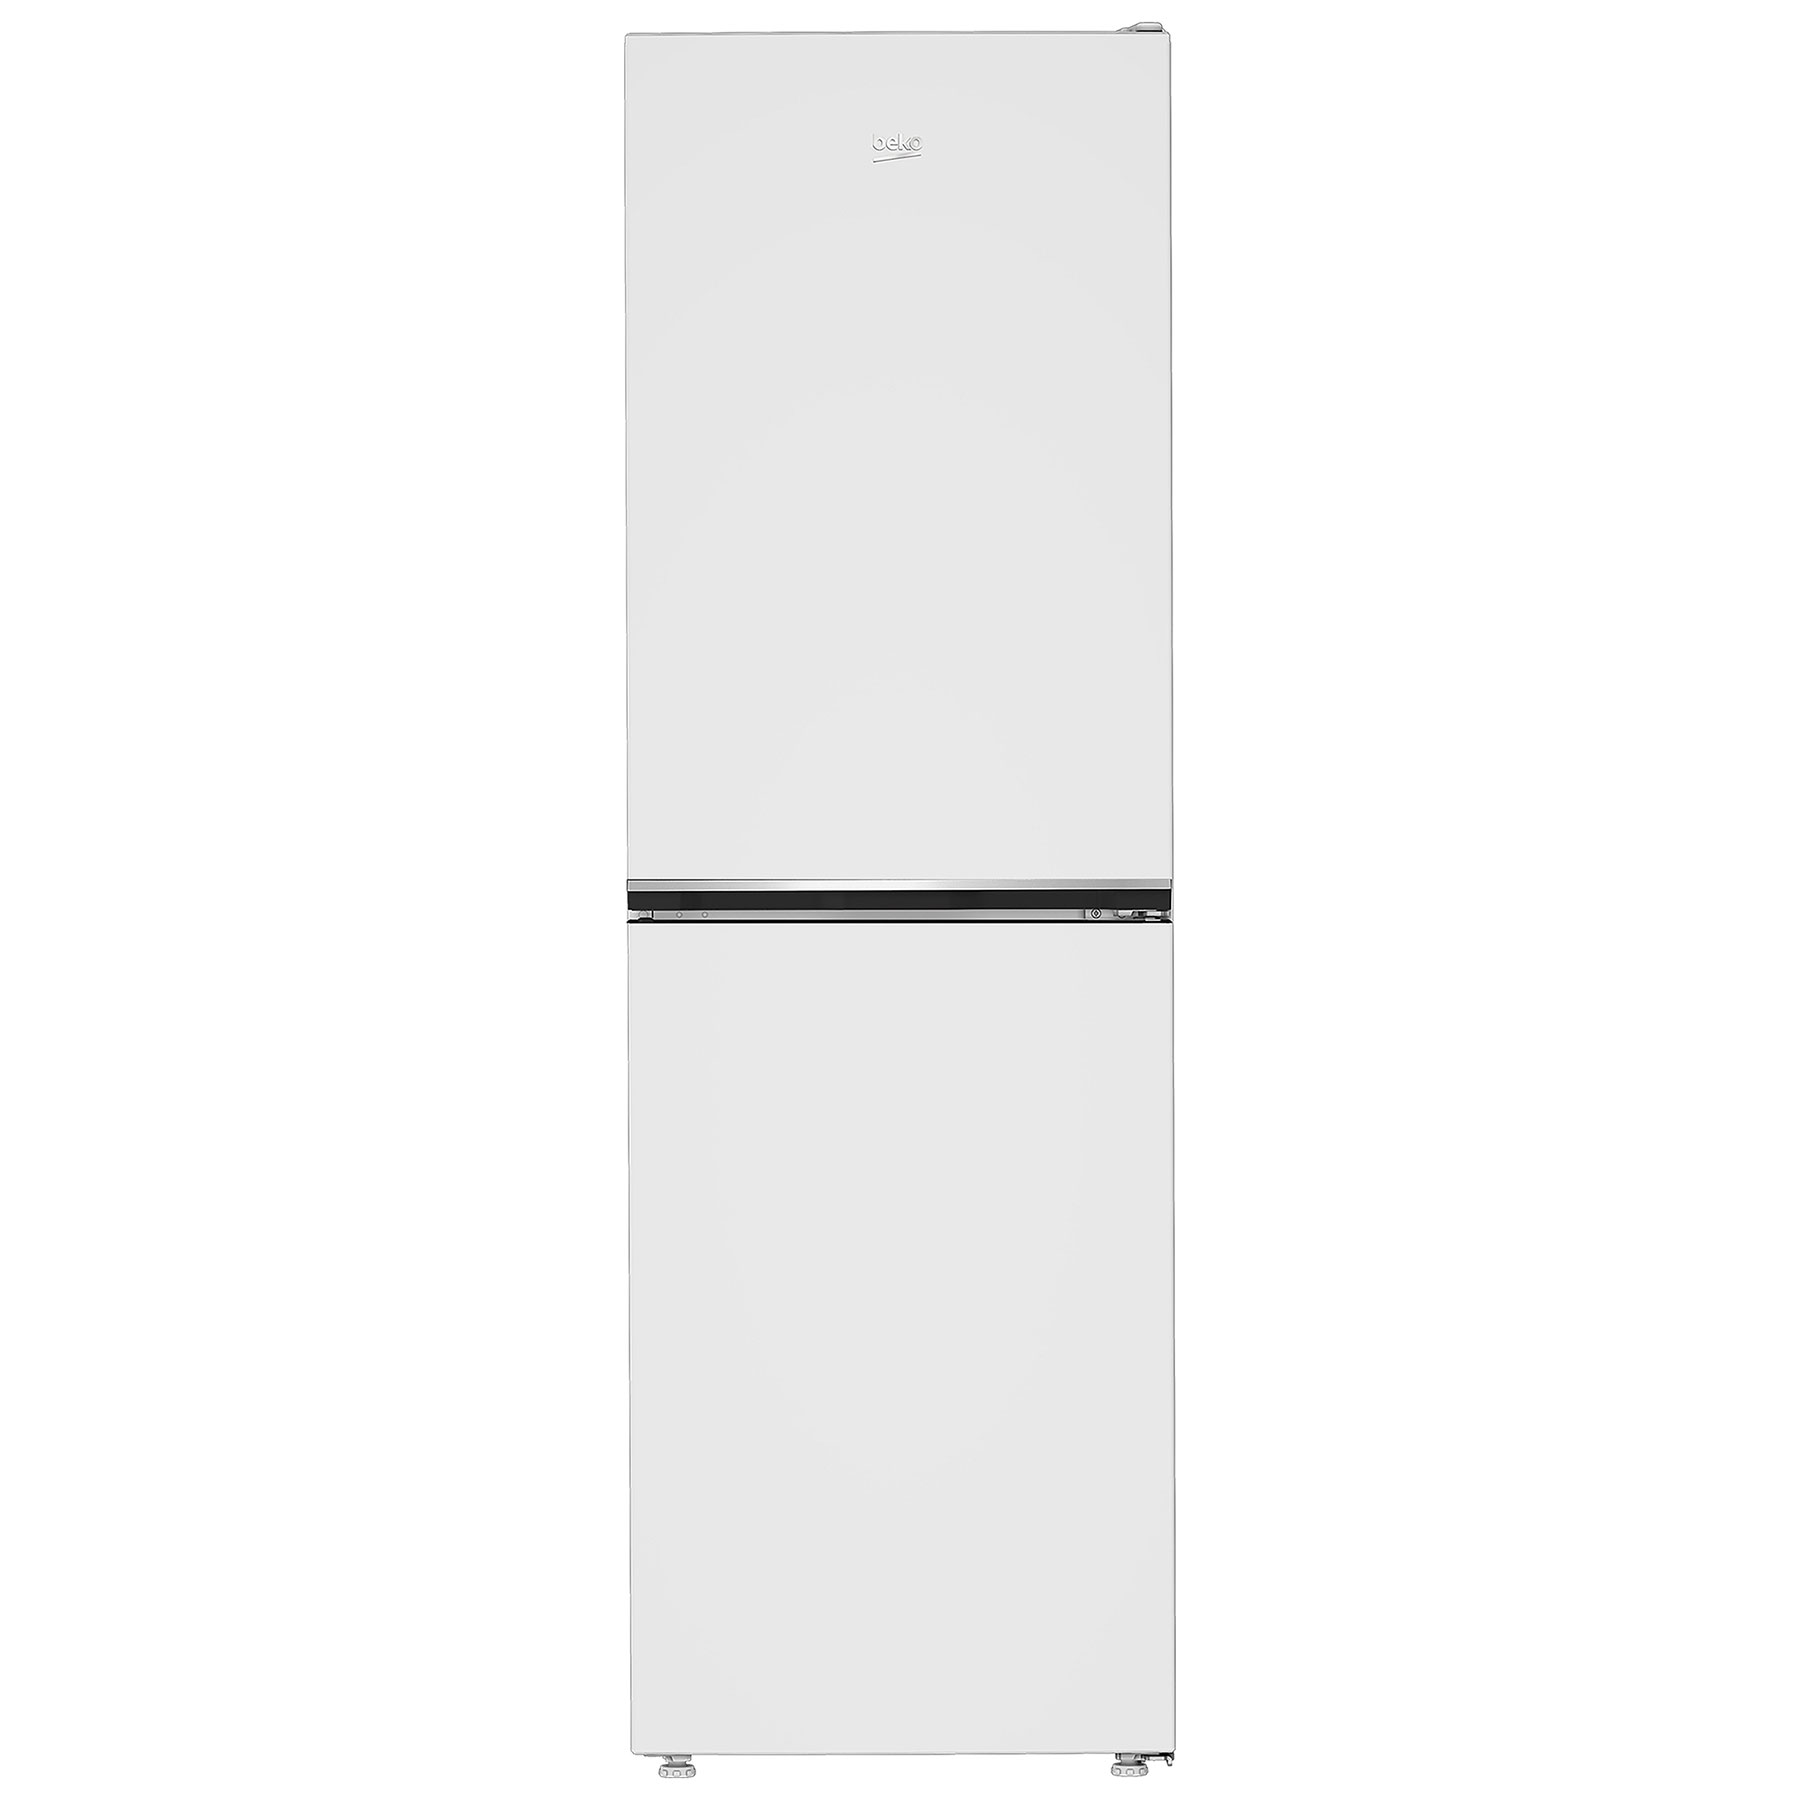 Image of Beko CNG4692VW 60cm Frost Free Fridge Freezer in White 1 82m E Rated